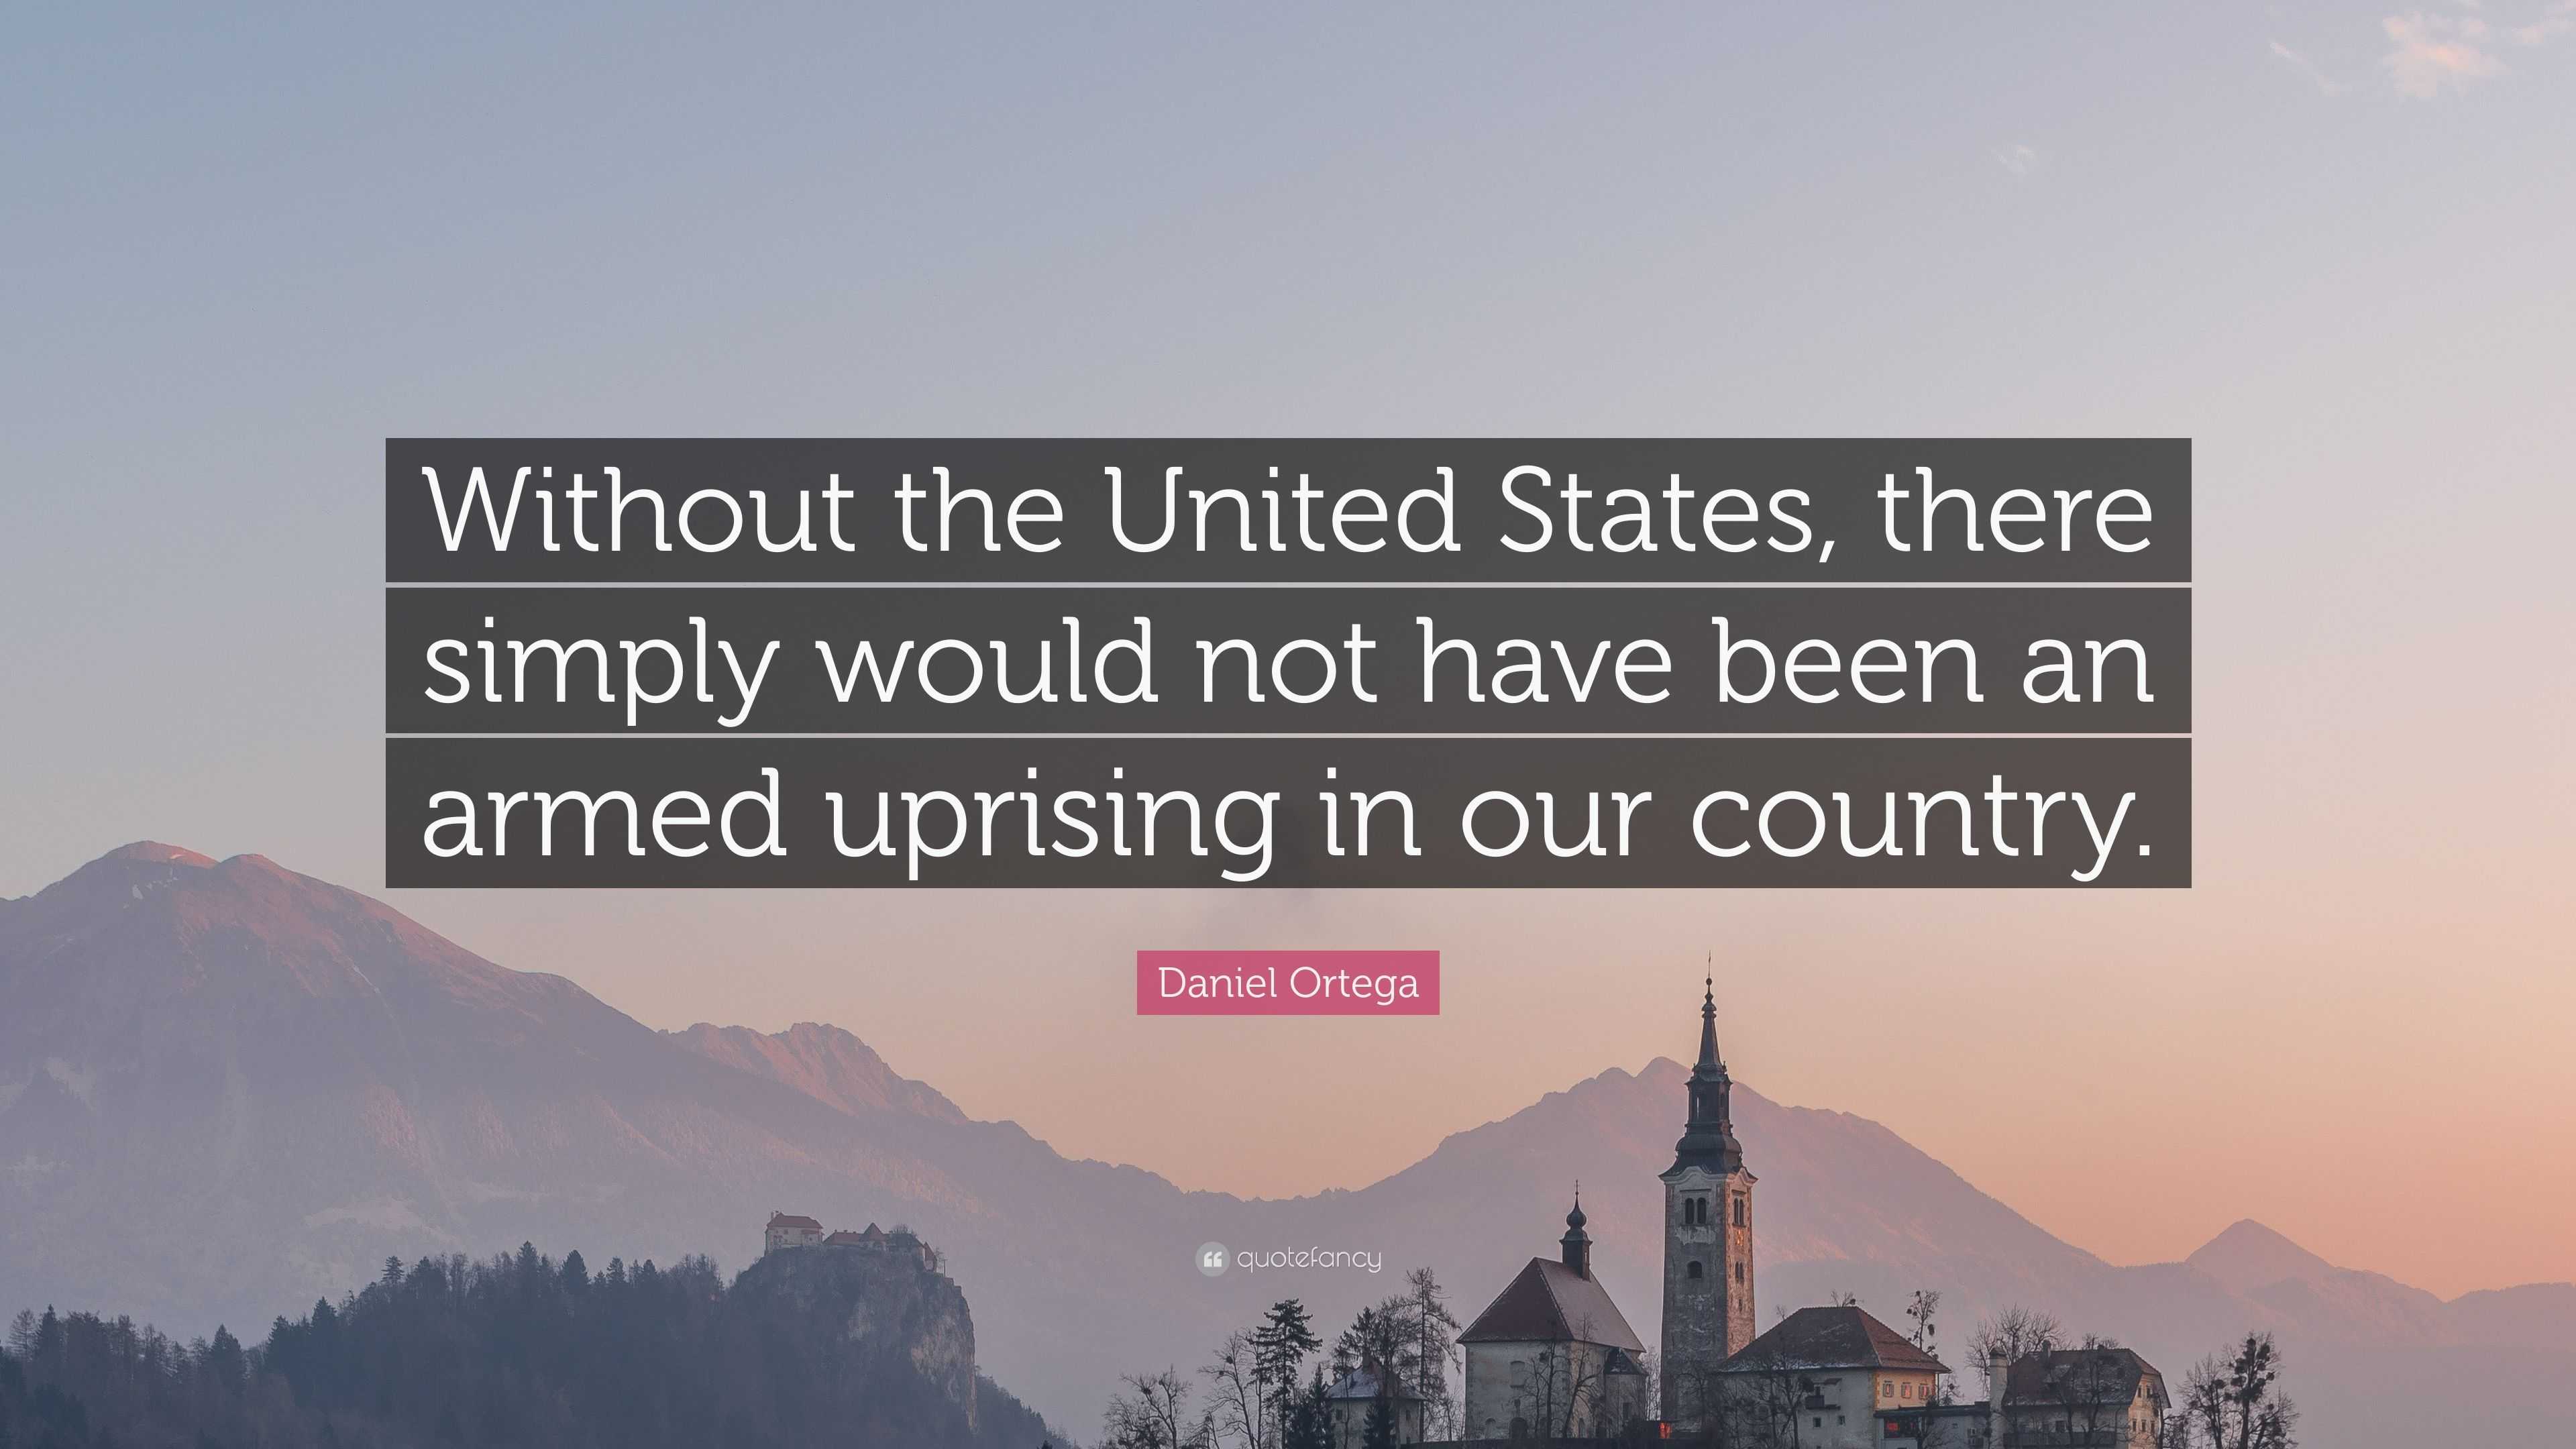 Daniel Ortega Quote: “Without the United States, there simply would not ...